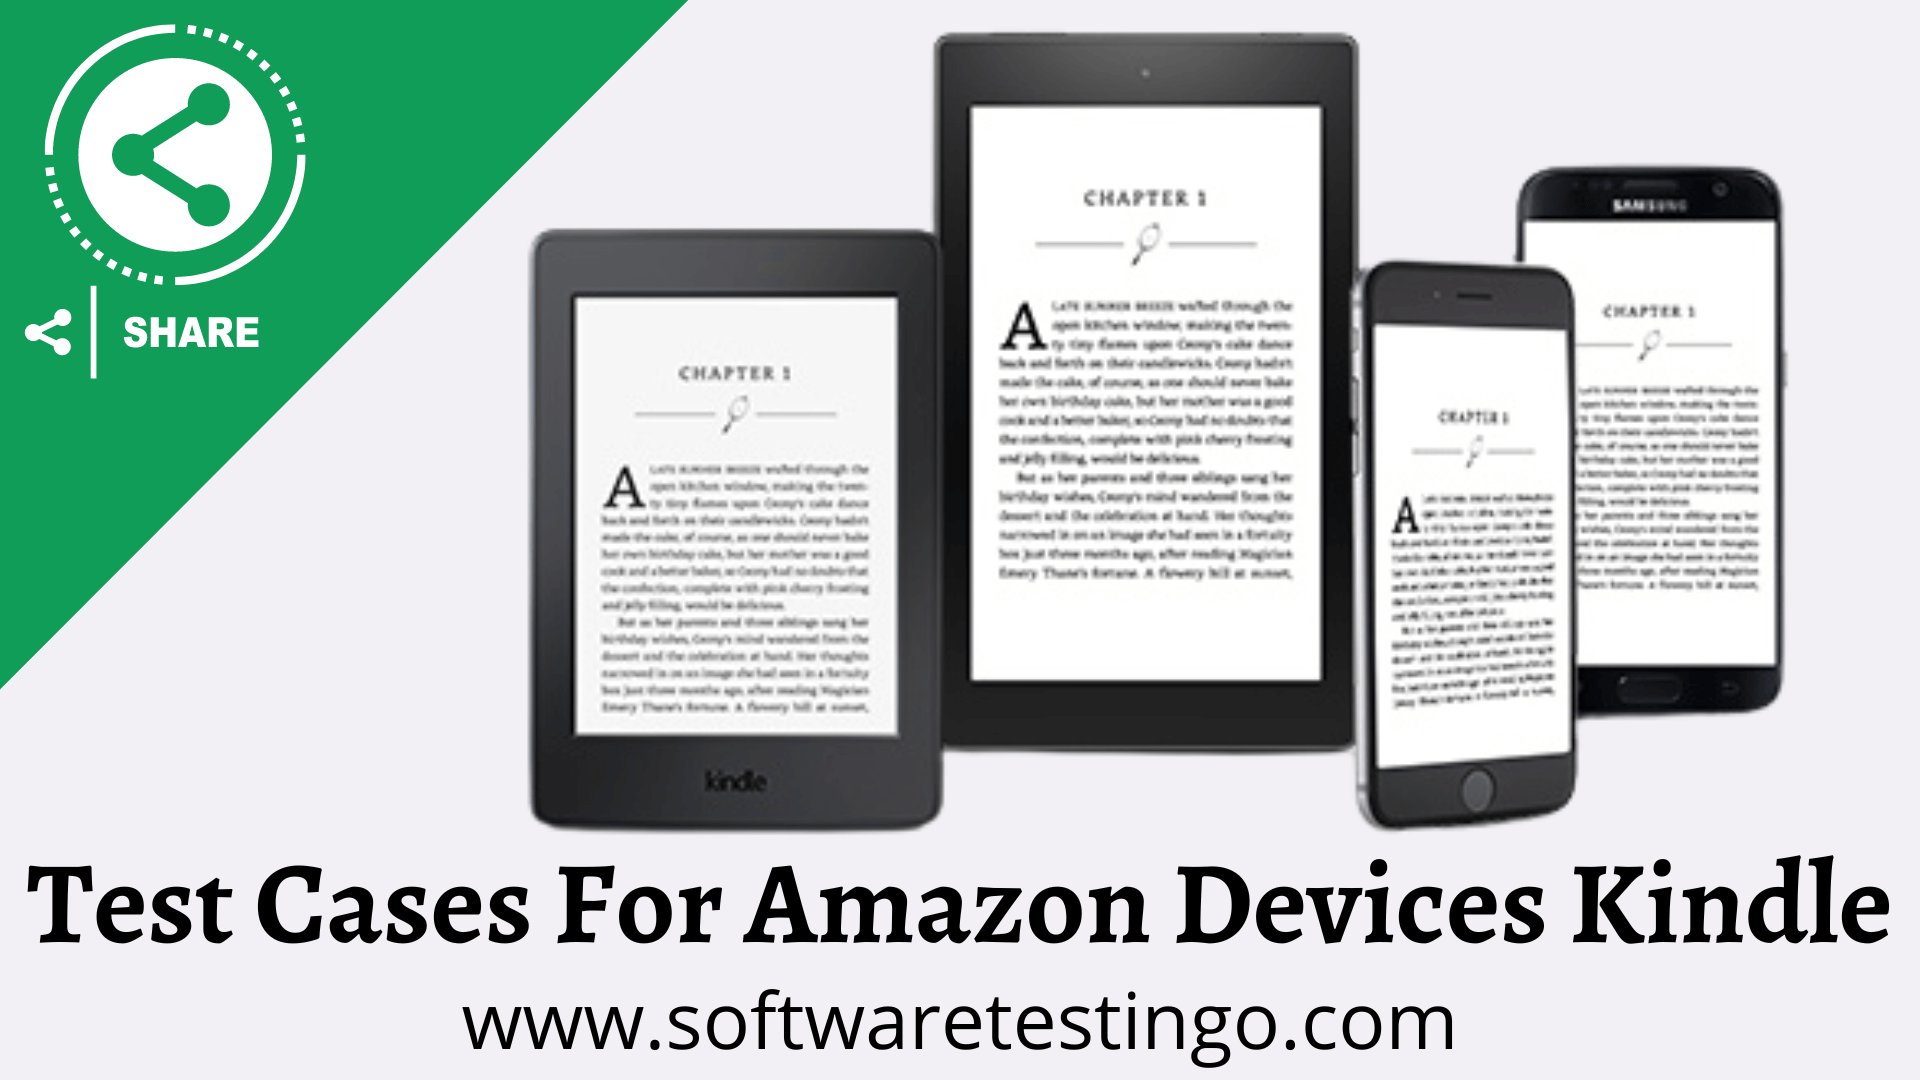 Test Cases For Amazon Devices Kindle 1